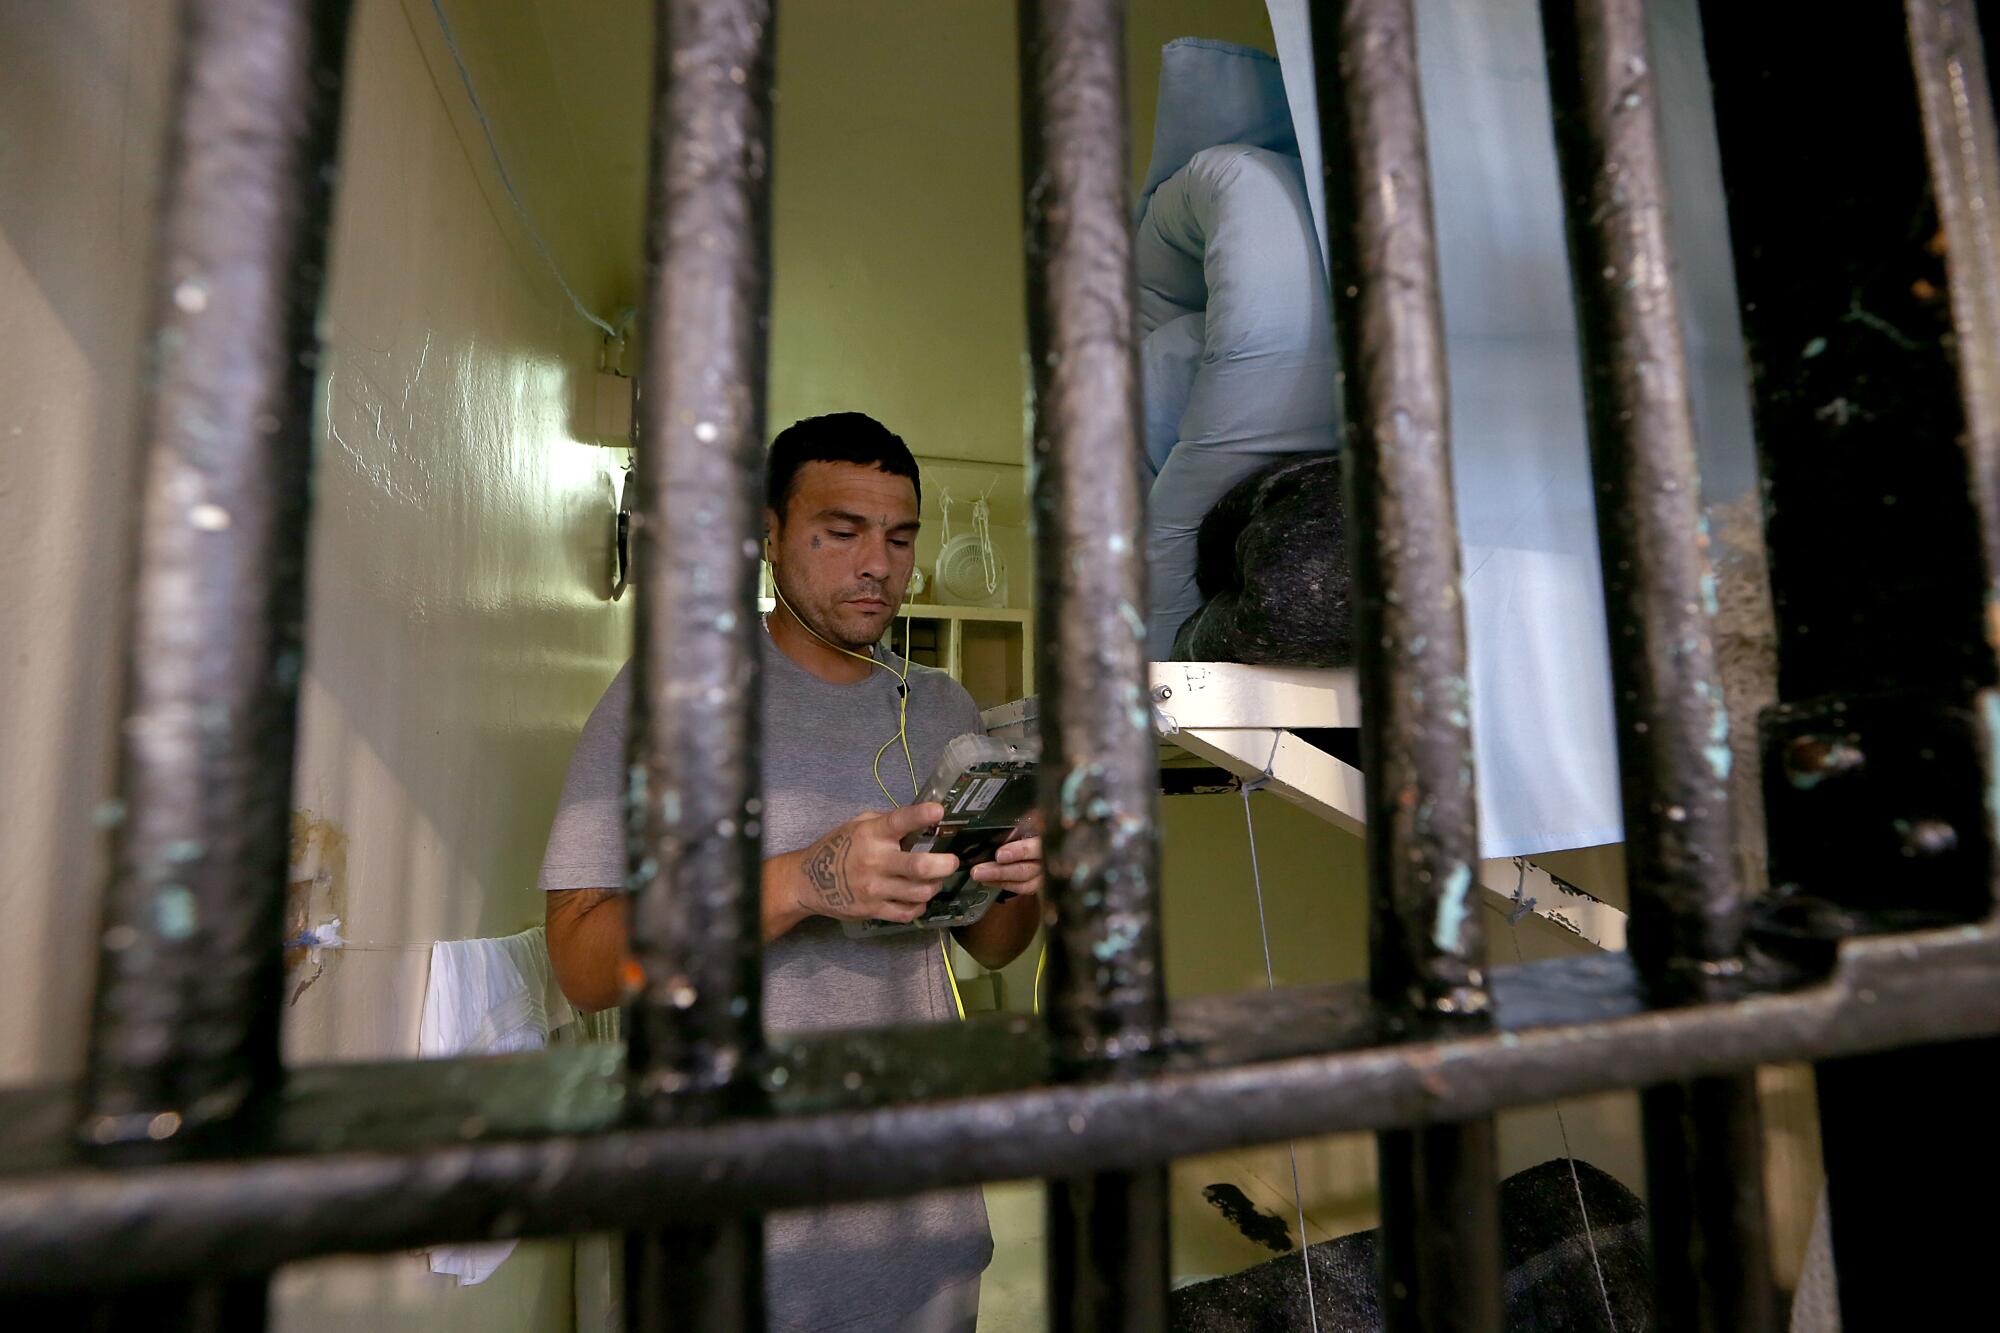 A man standing in a prison cell using a tablet device with earphones, pictured through the metal bars of the cell